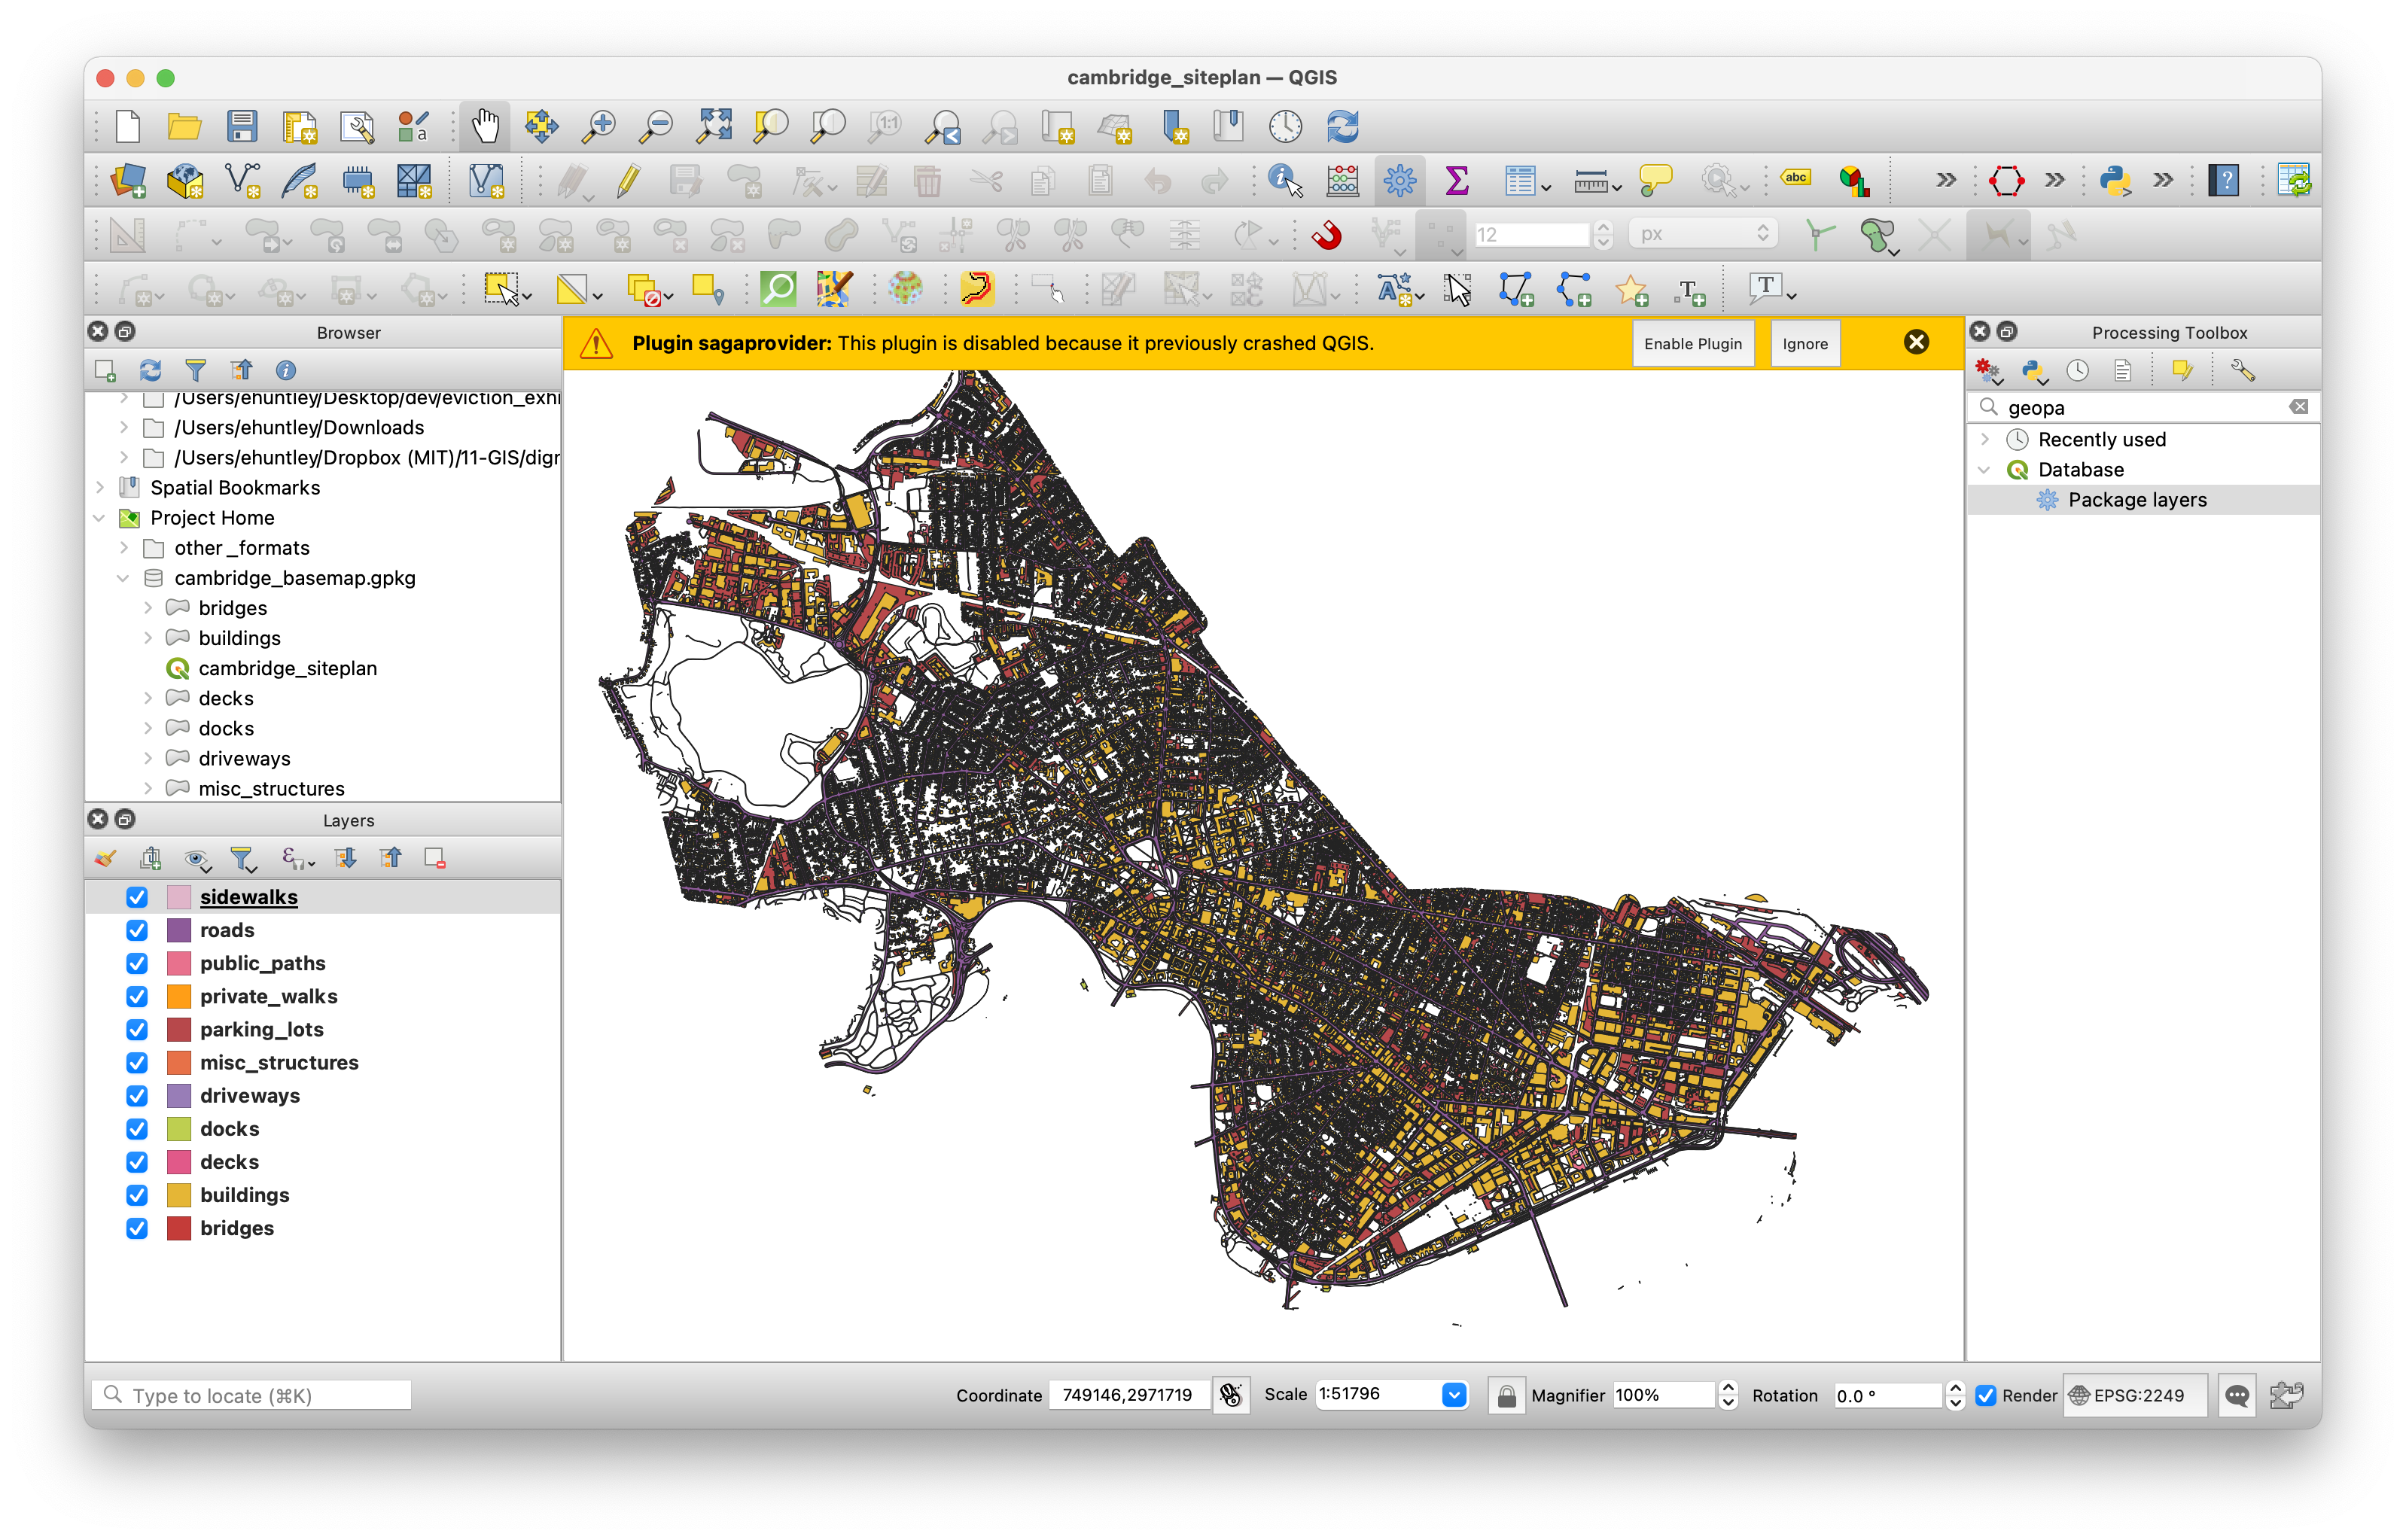 Provided QGIS project.